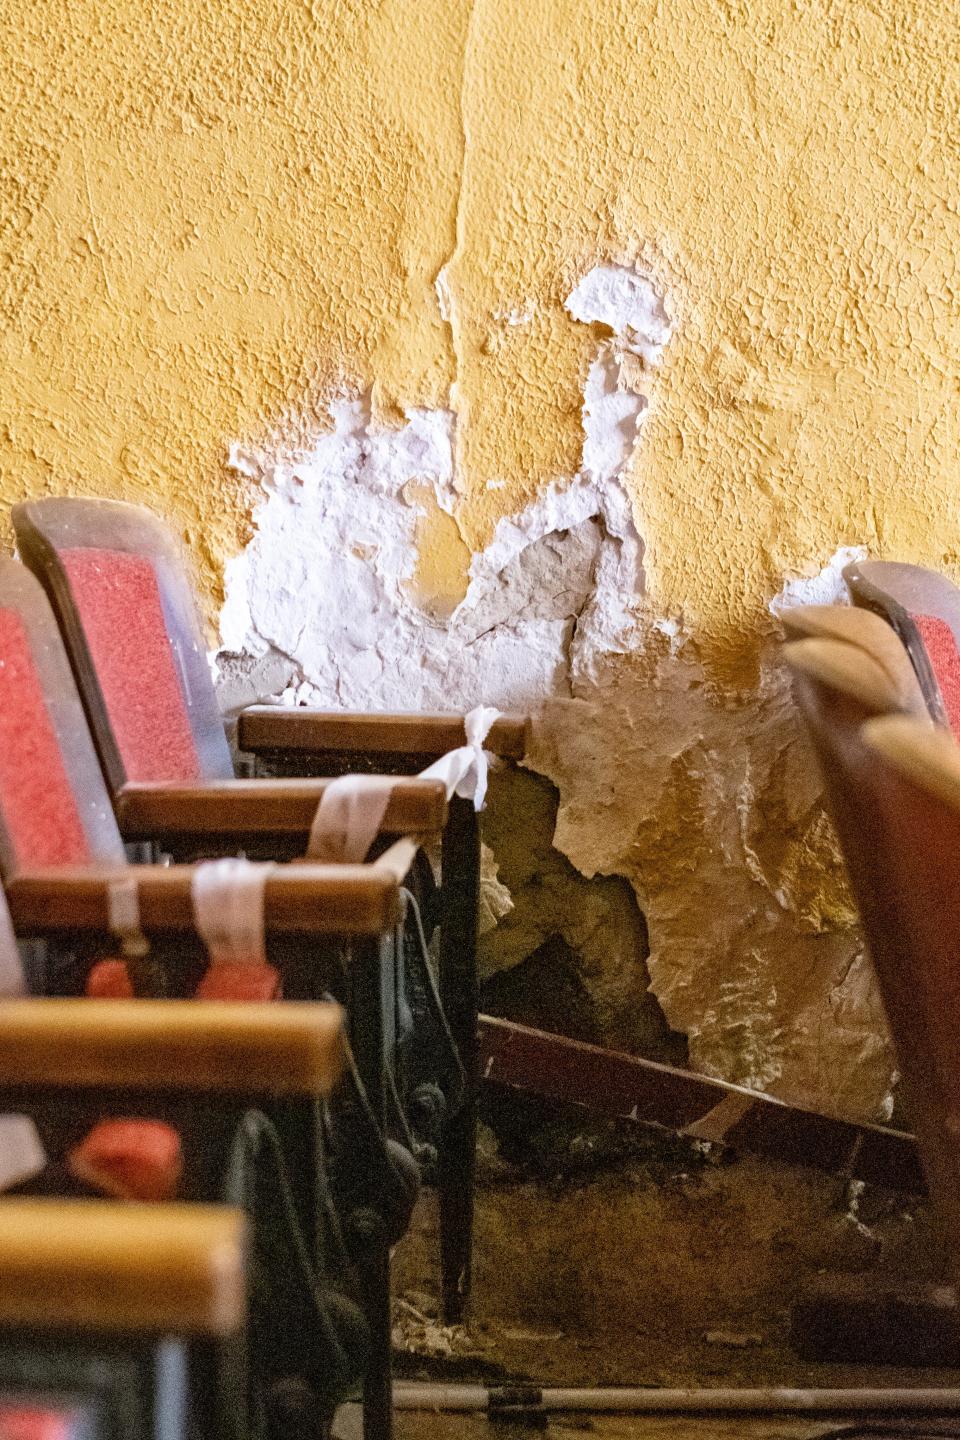 Water damage from the leaking roof is evident along the walls of the auditorium, requiring the blocking of adjacent seating at the Cambridge Performing Arts Center.